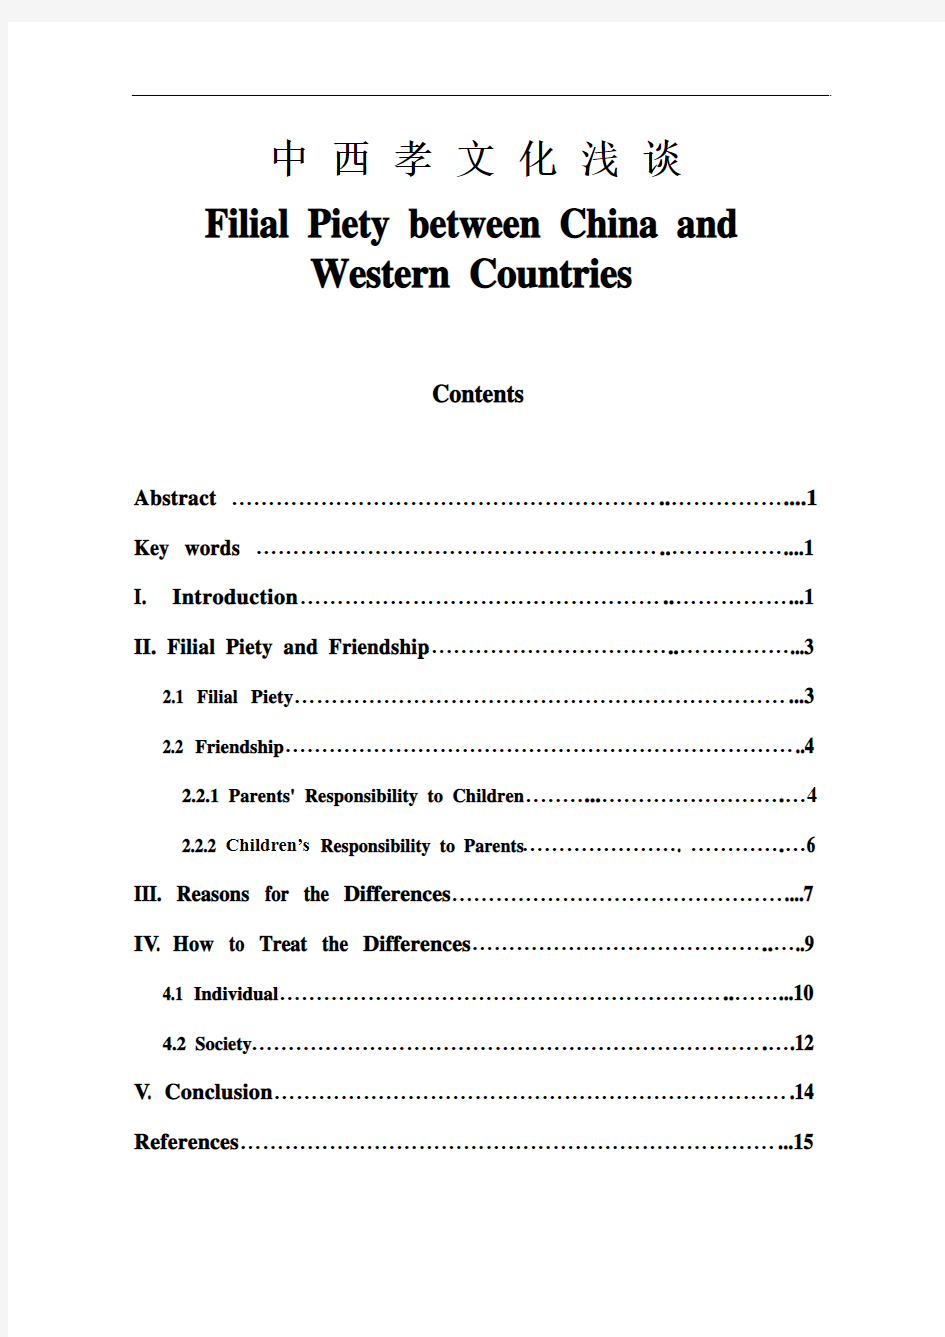 Filial Piety between China and Western Countries